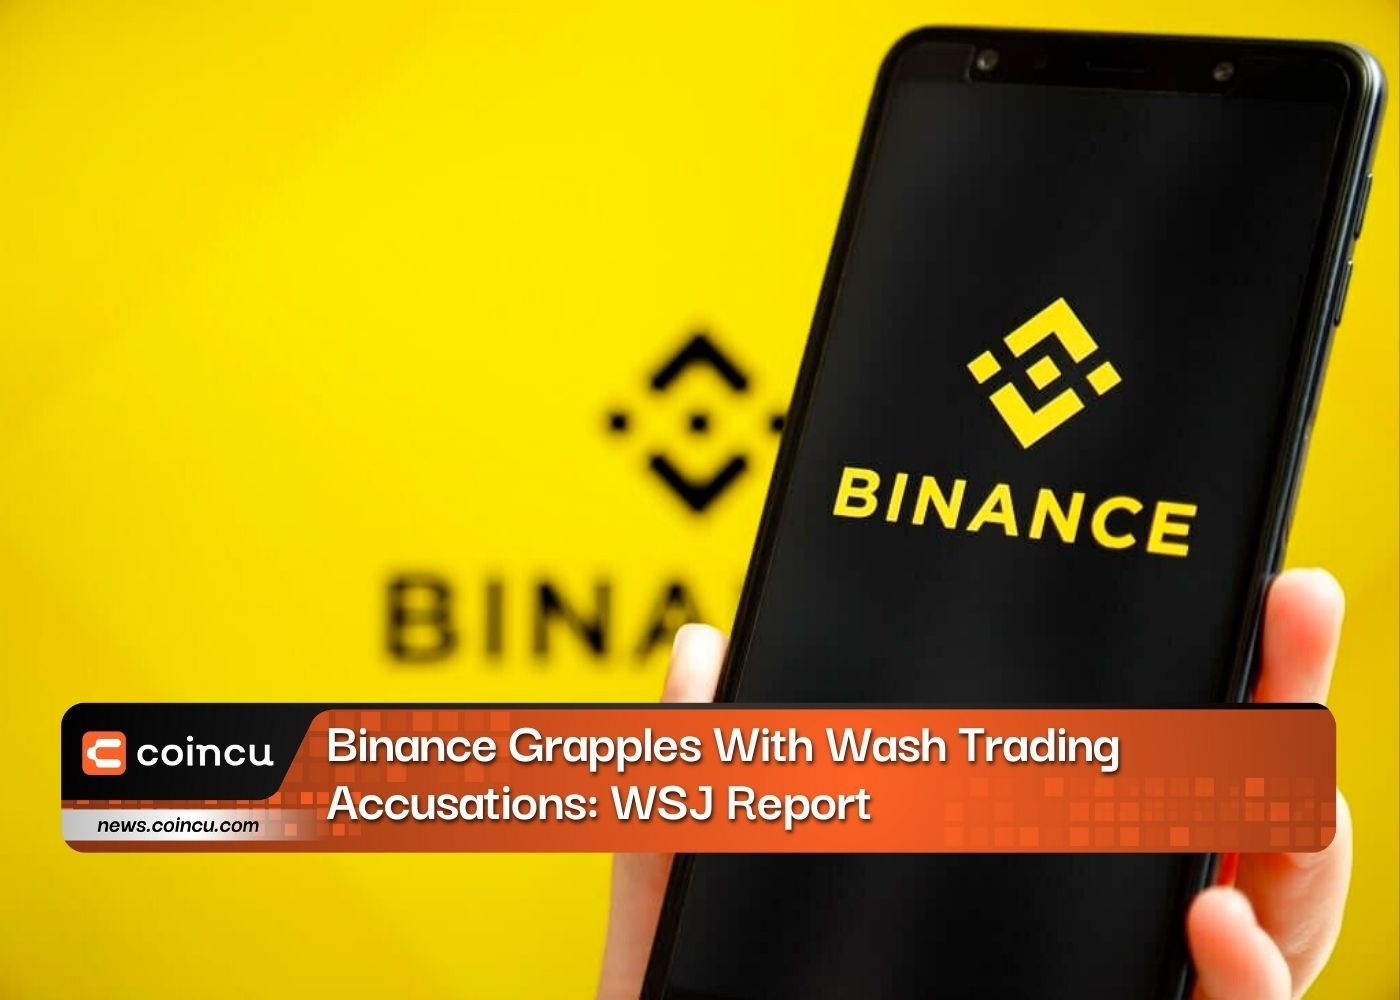 Binance Grapples With Wash Trading Accusations: WSJ Report